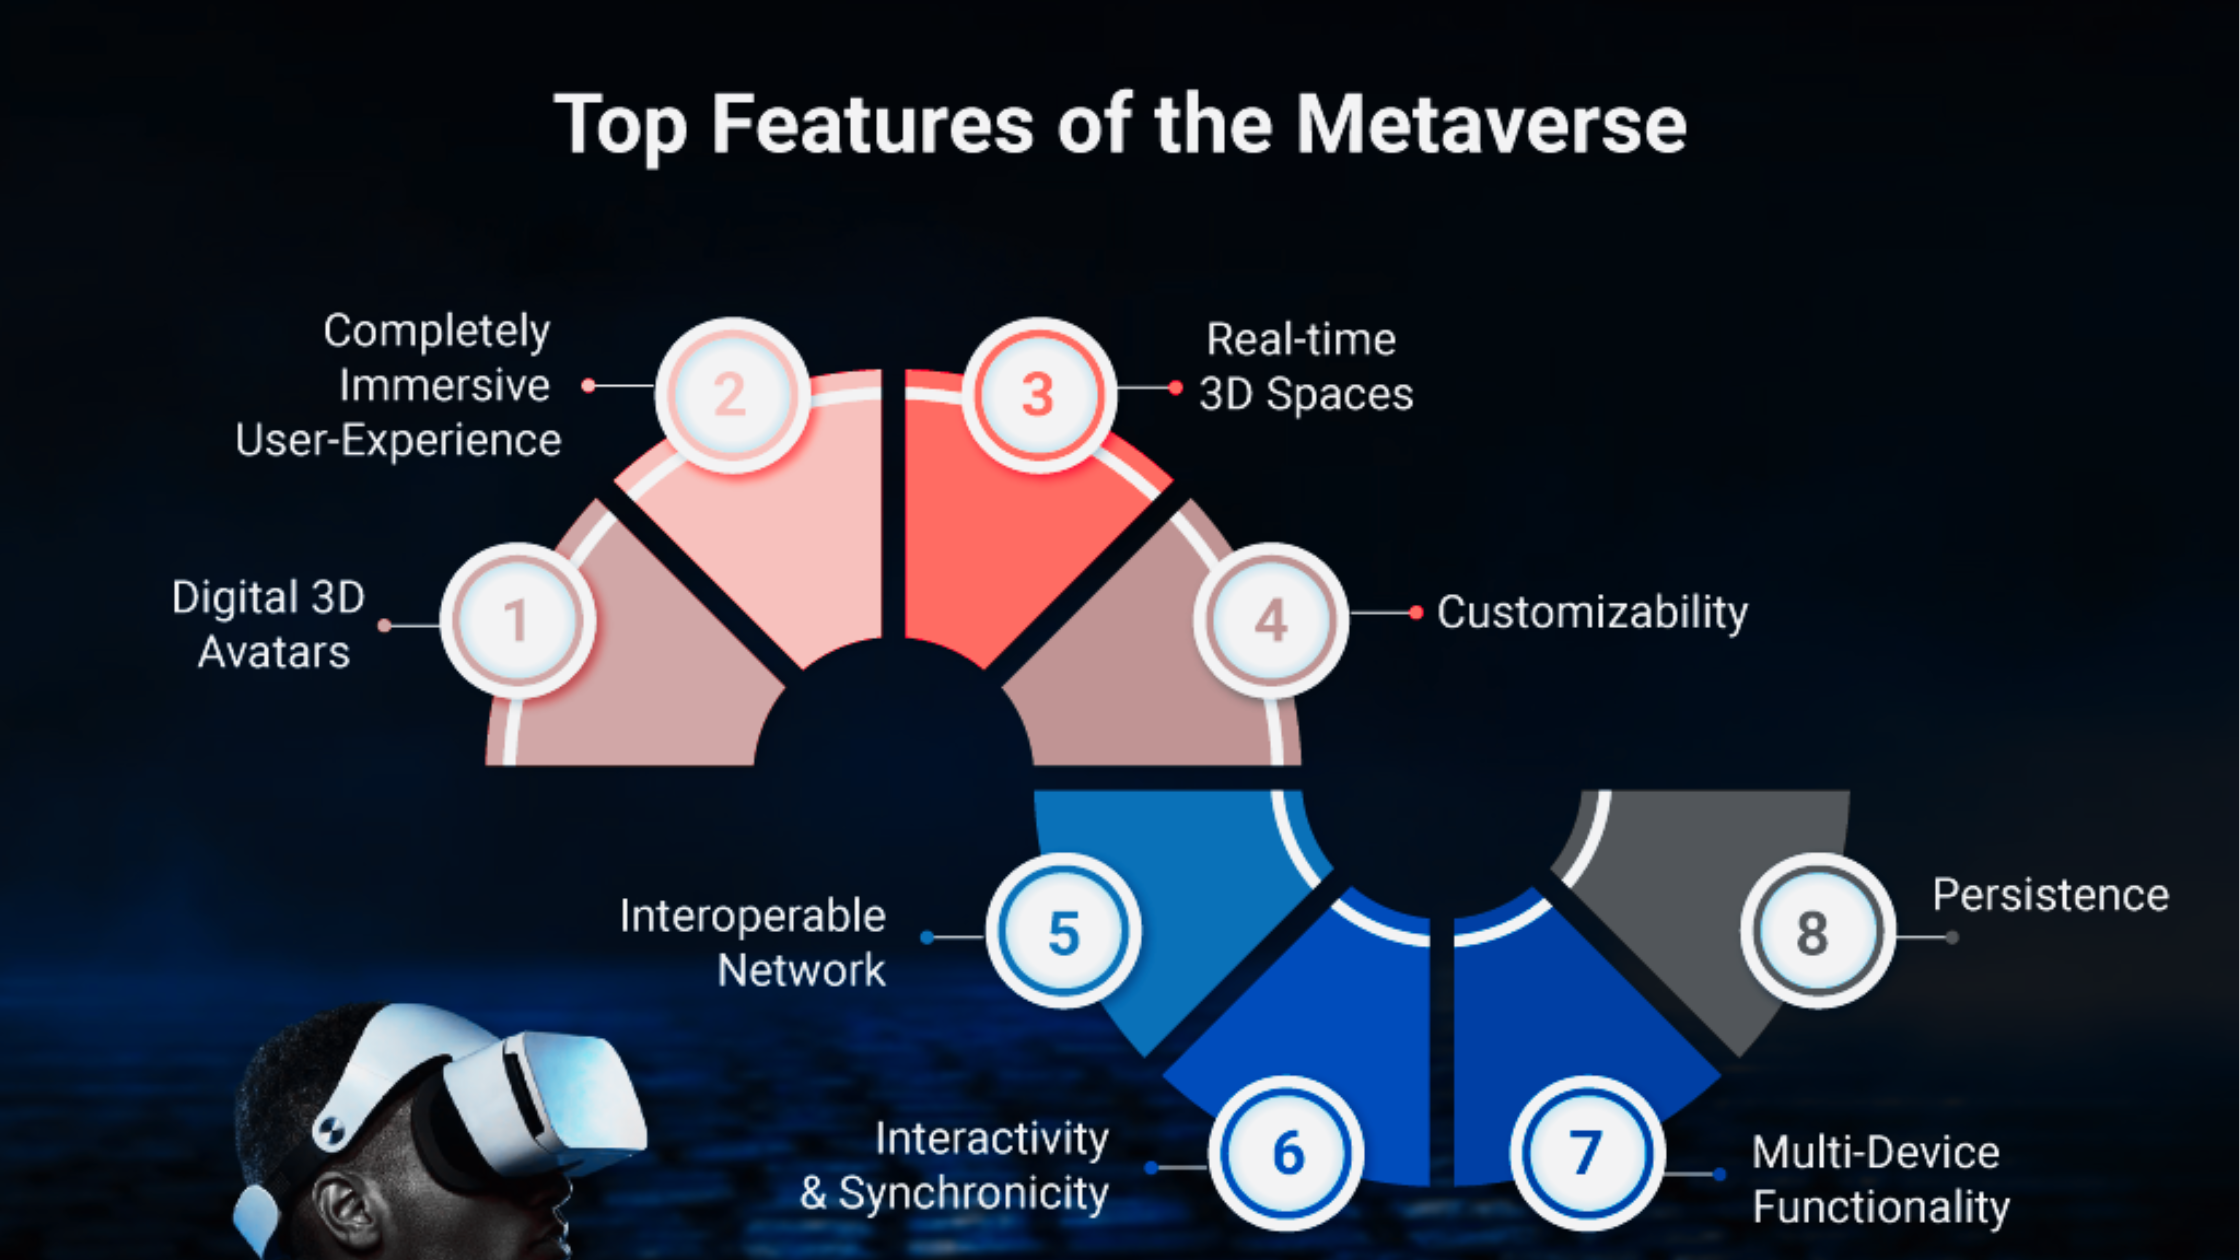 Top Features of the Metaverse